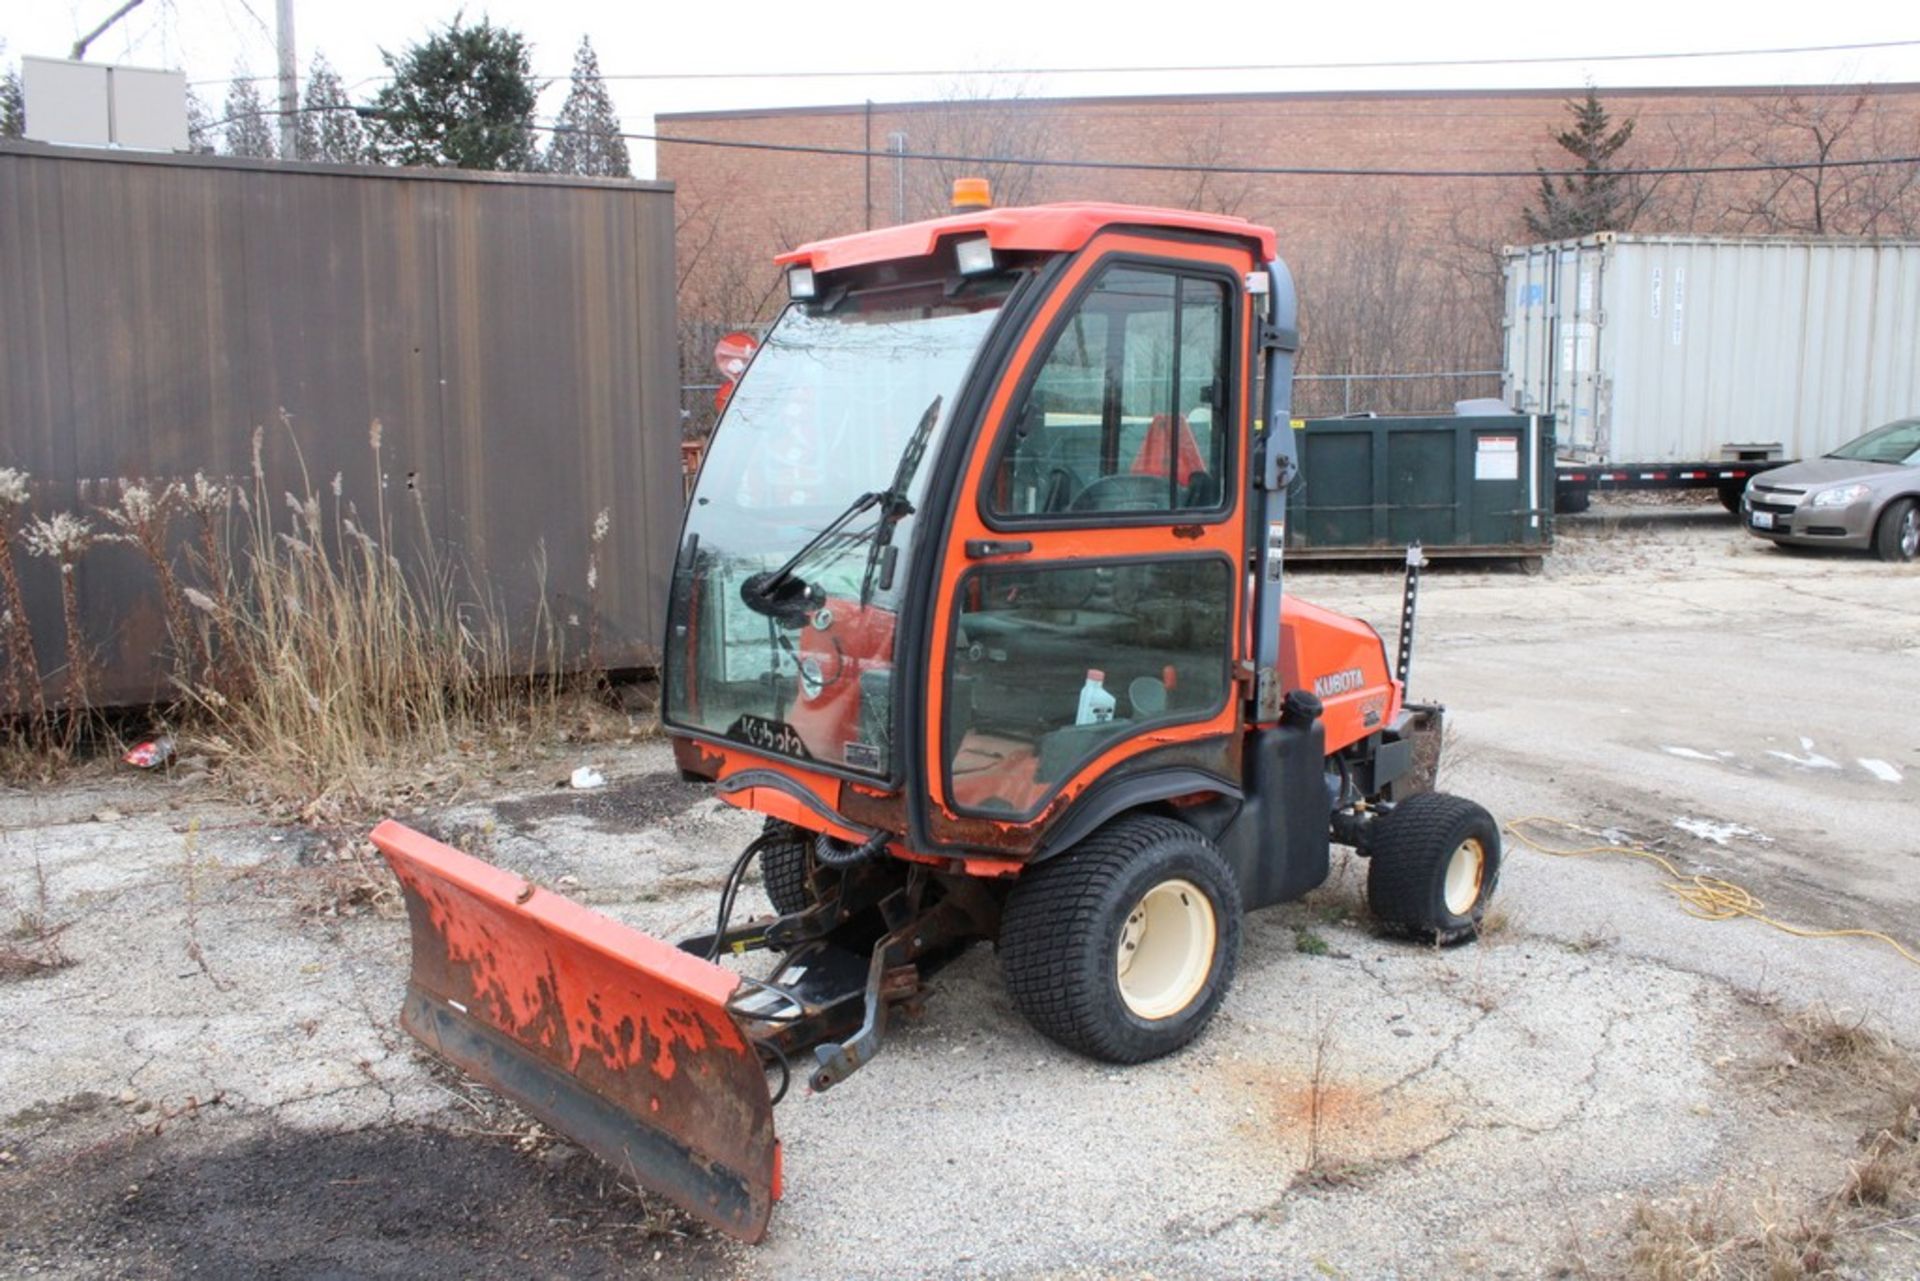 KOBOTA MODEL F2880, 2WD, 28HP, S/N 11032, WITH SNOW PLOW ATTACHMENT - Image 3 of 13